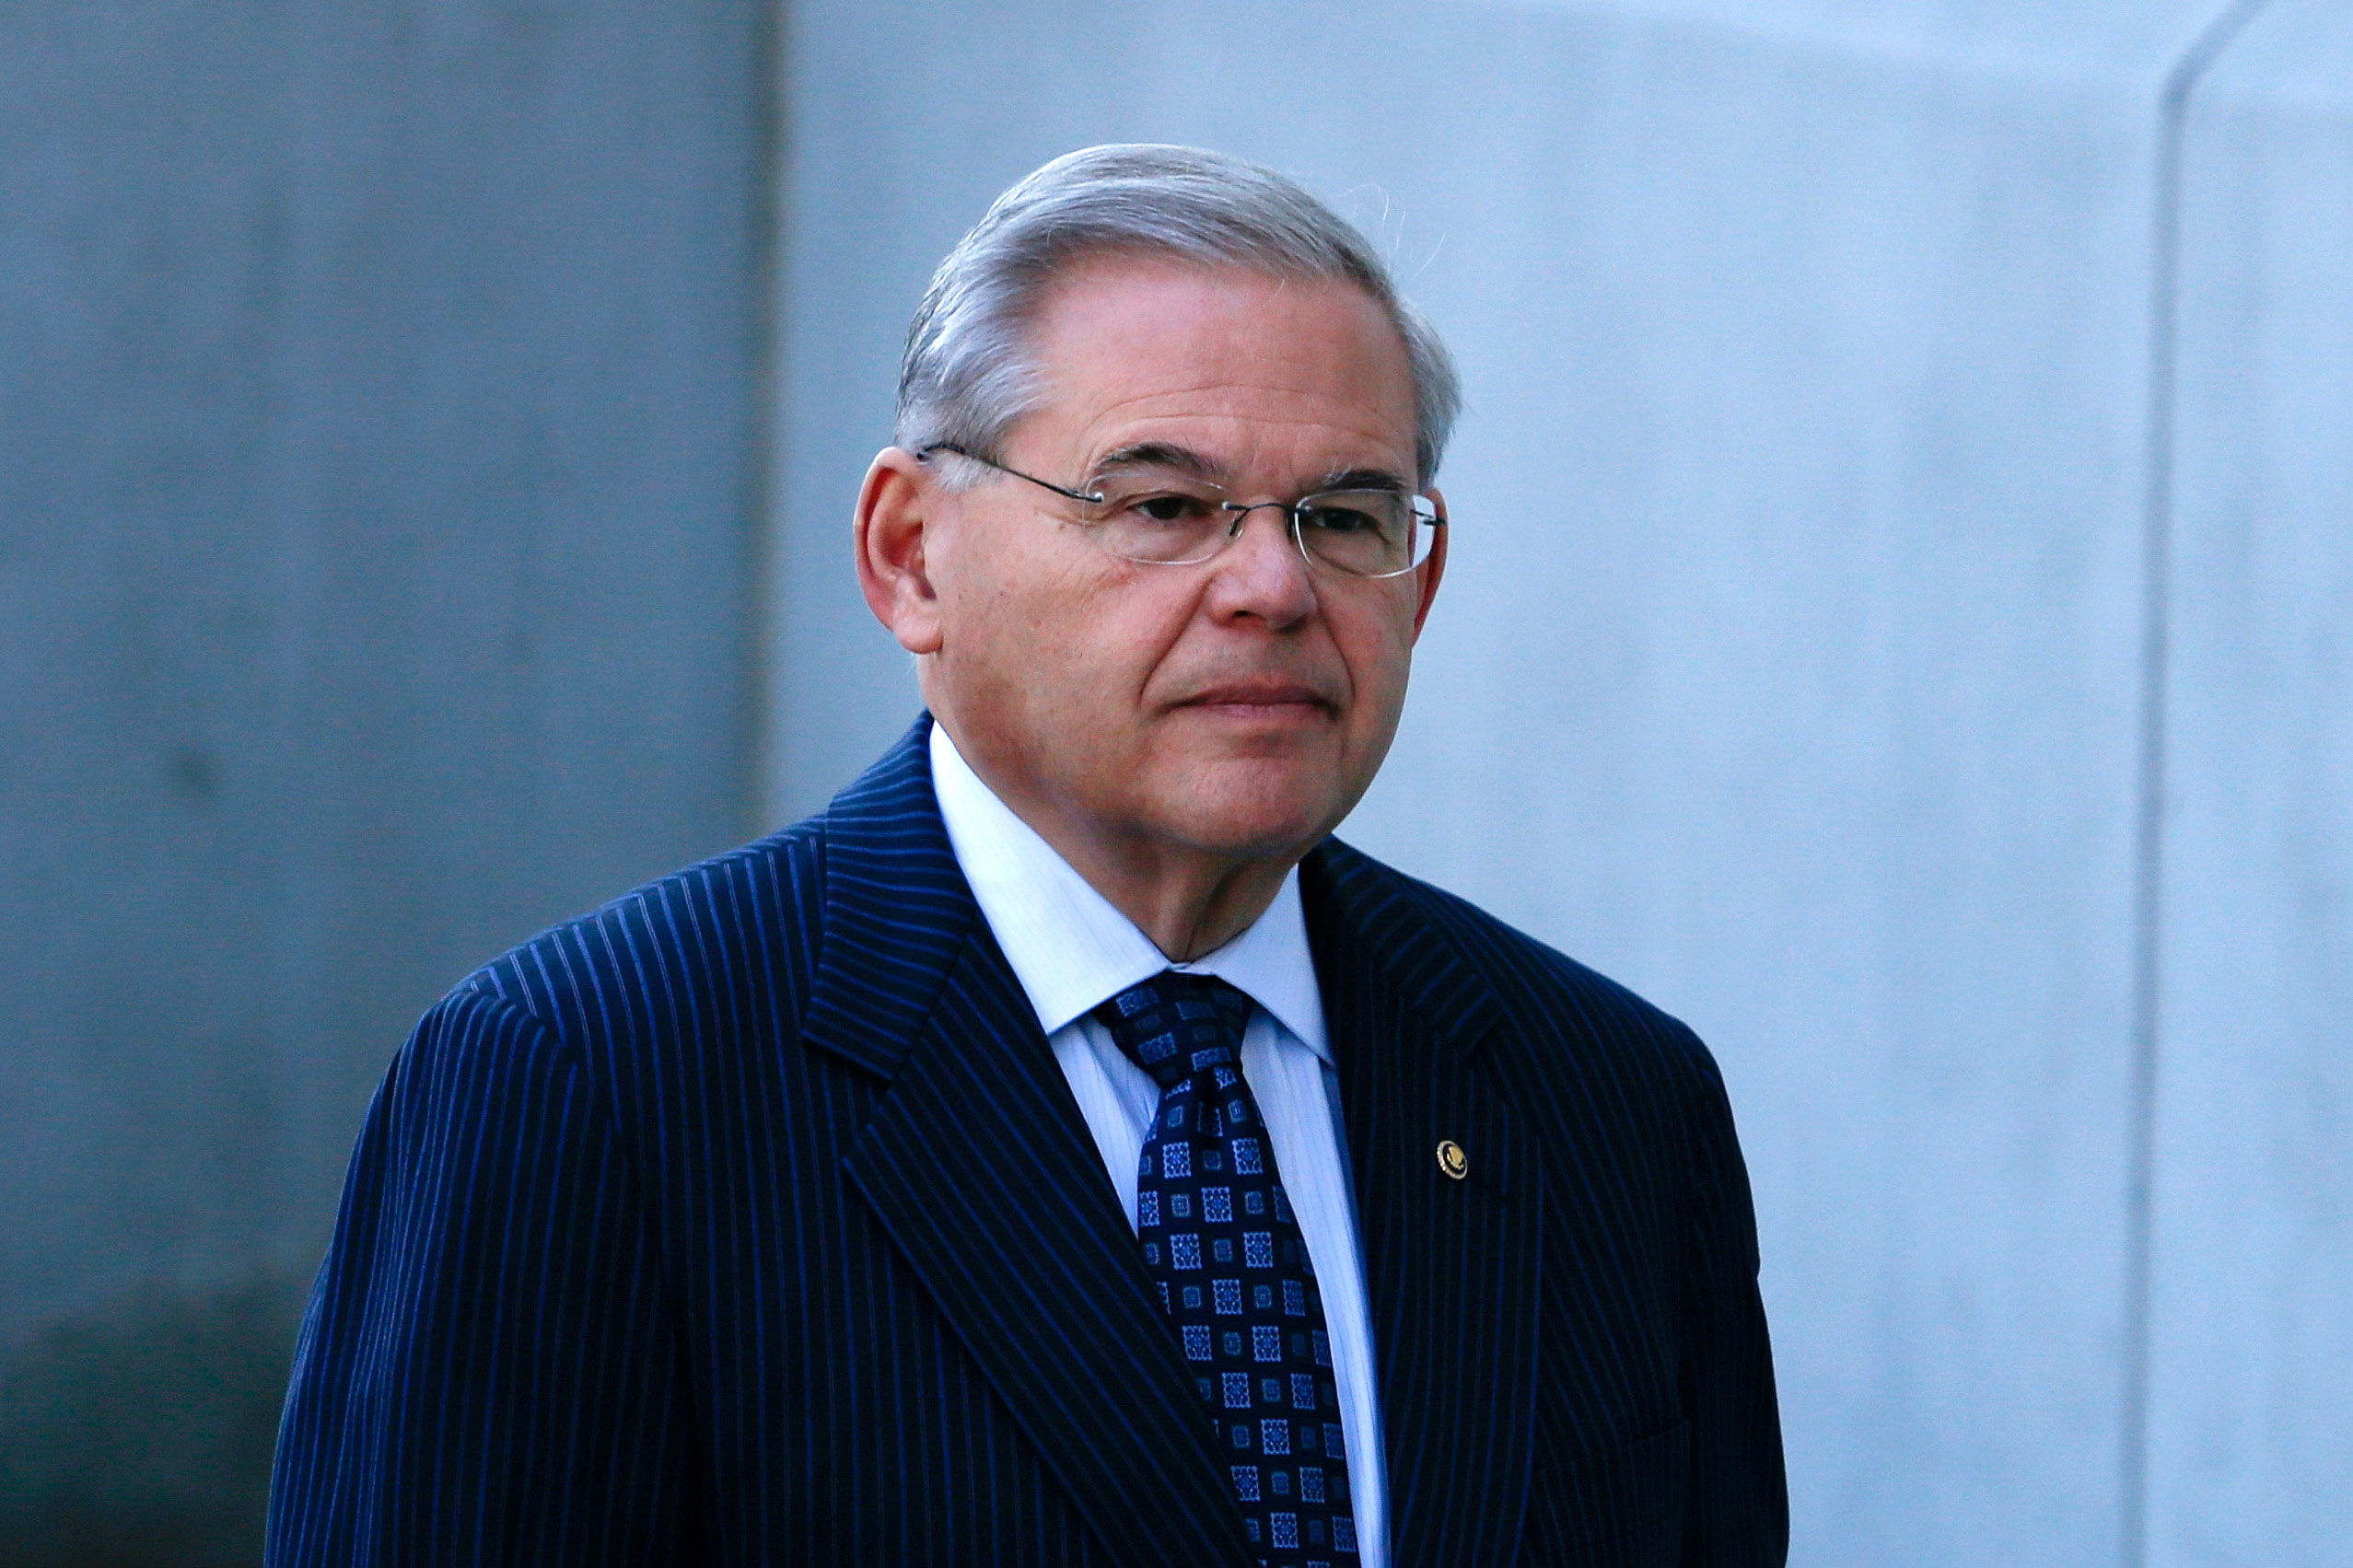 NEWARK, NJ - APRIL 02: Sen. Robert Menendez arrives at a federal court to be indicted on corruption charges on April 2, 2015 in Newark, New Jersey. (Photo by Kena Betancur/Getty Images)